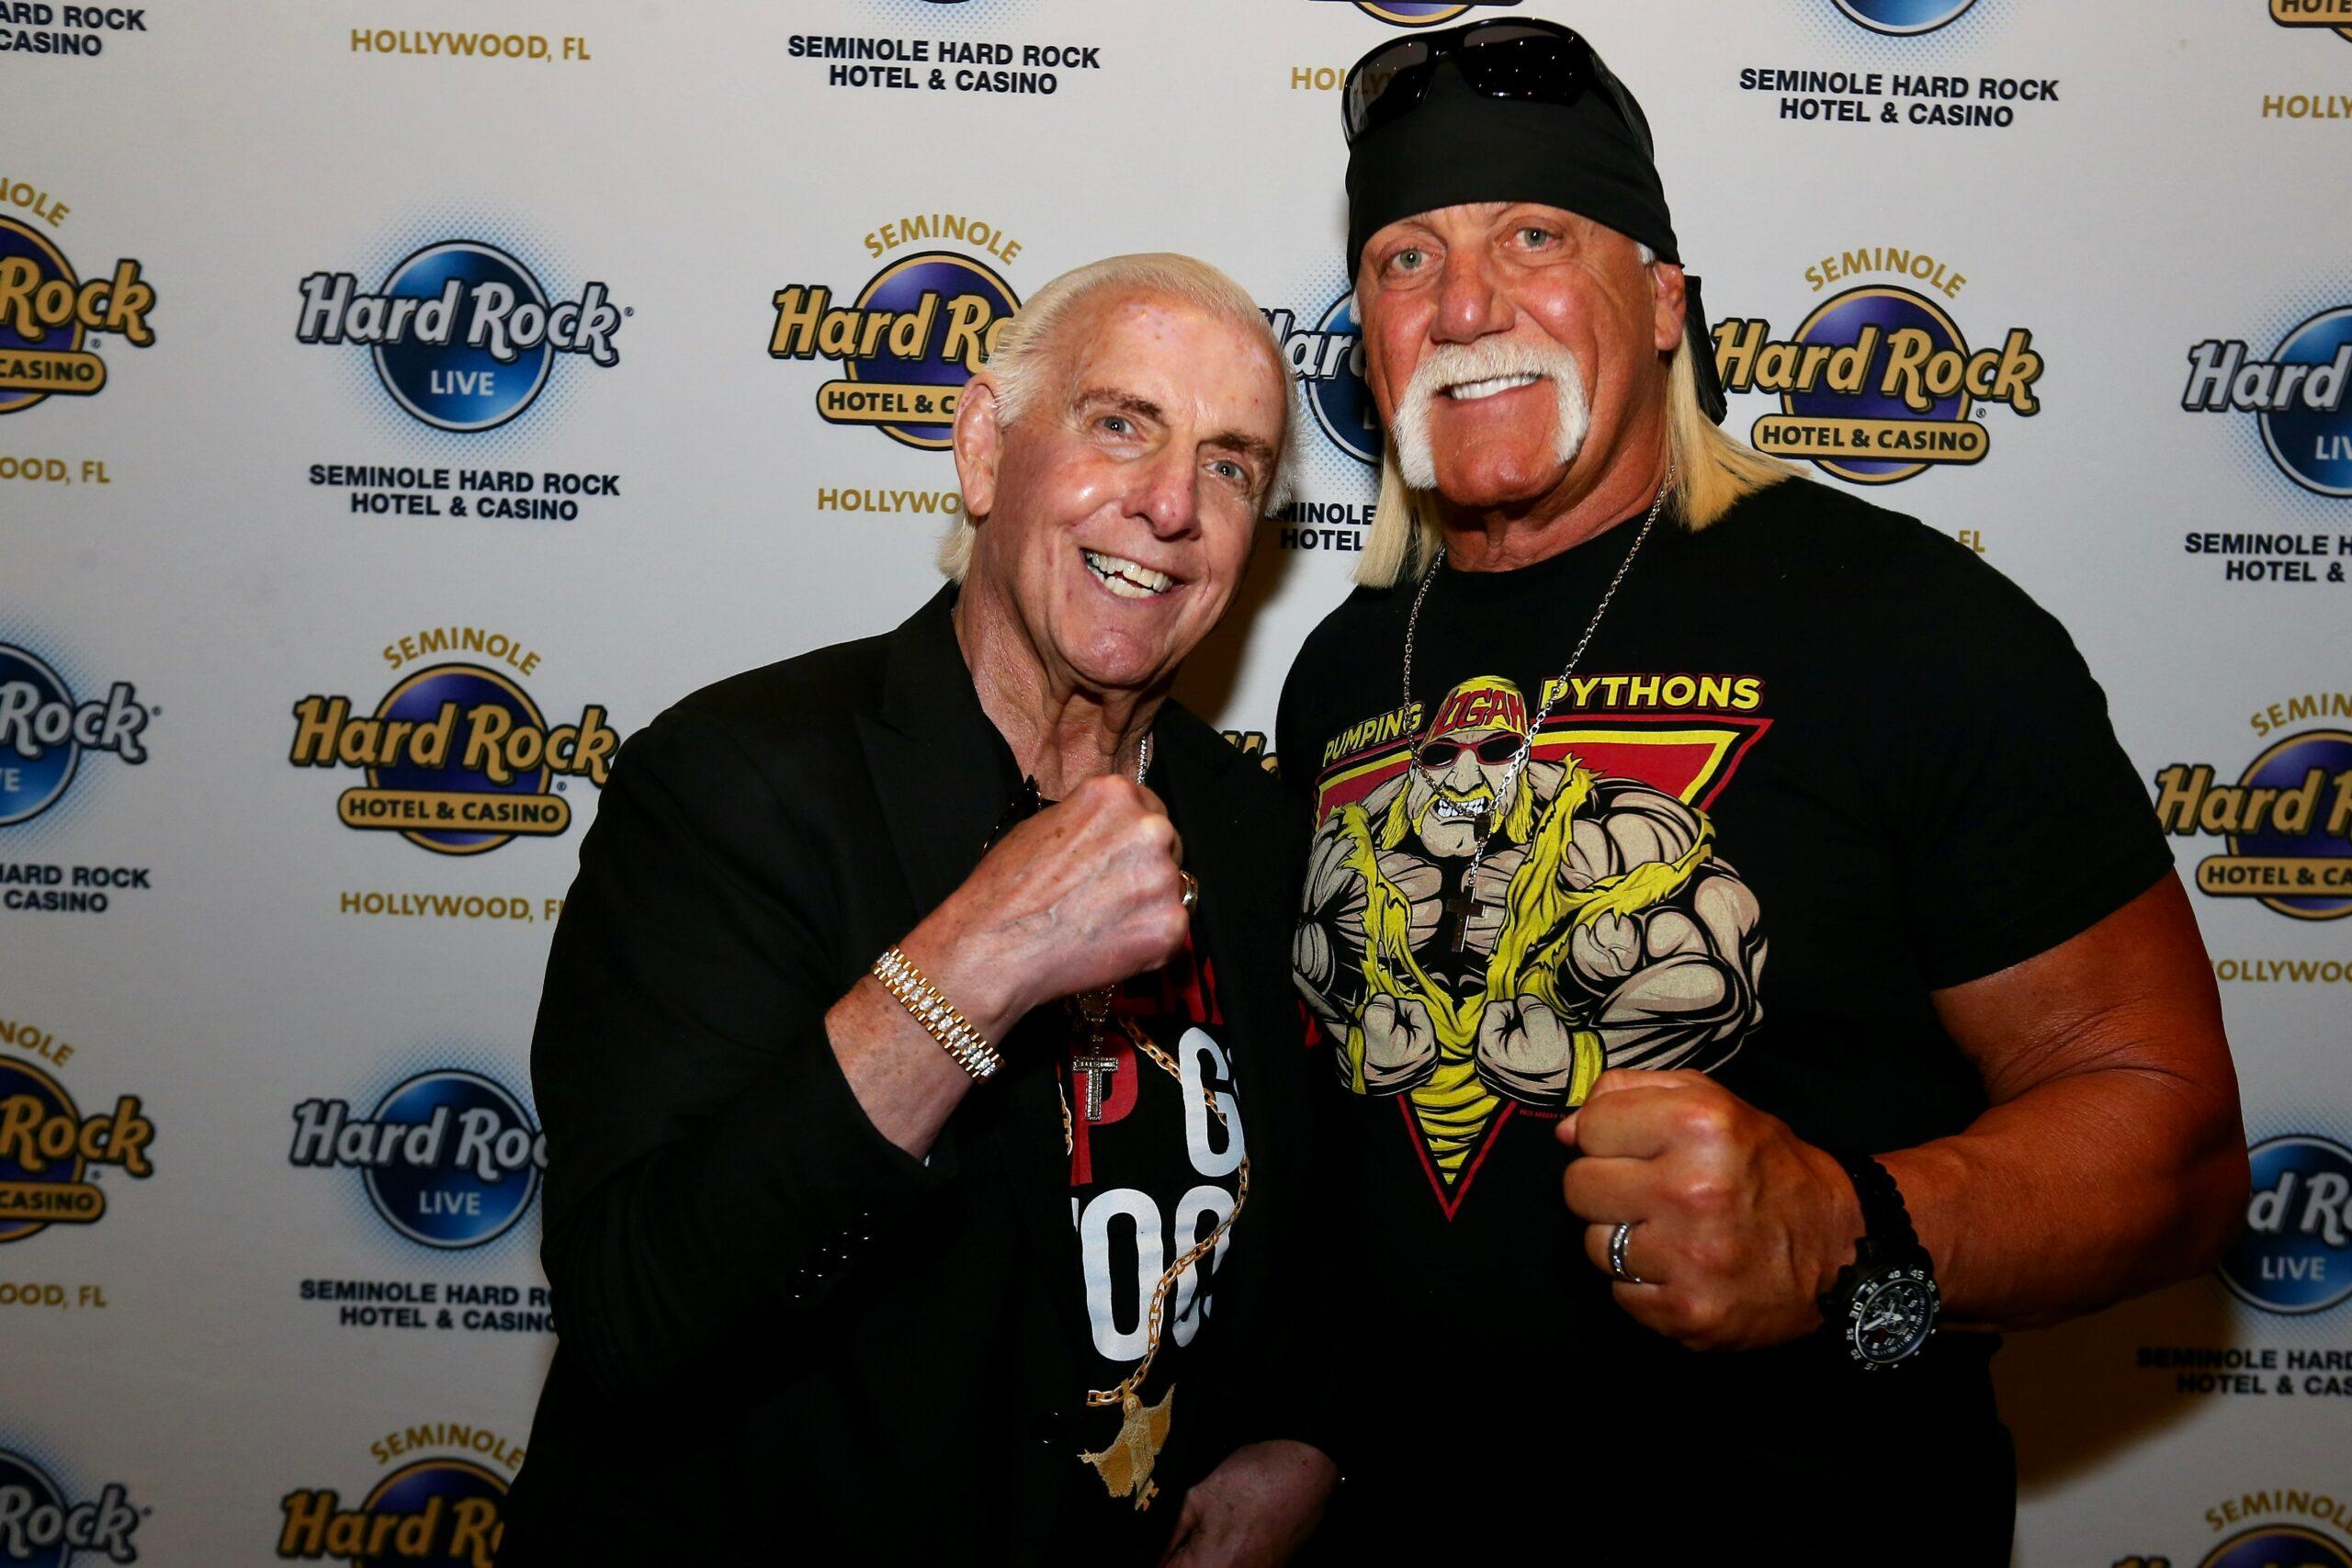 Hulk Hogan and Ric Flair Bring Legends of the Ring to Seminole Hard Rock Hotel amp Casino in Hollywood FL